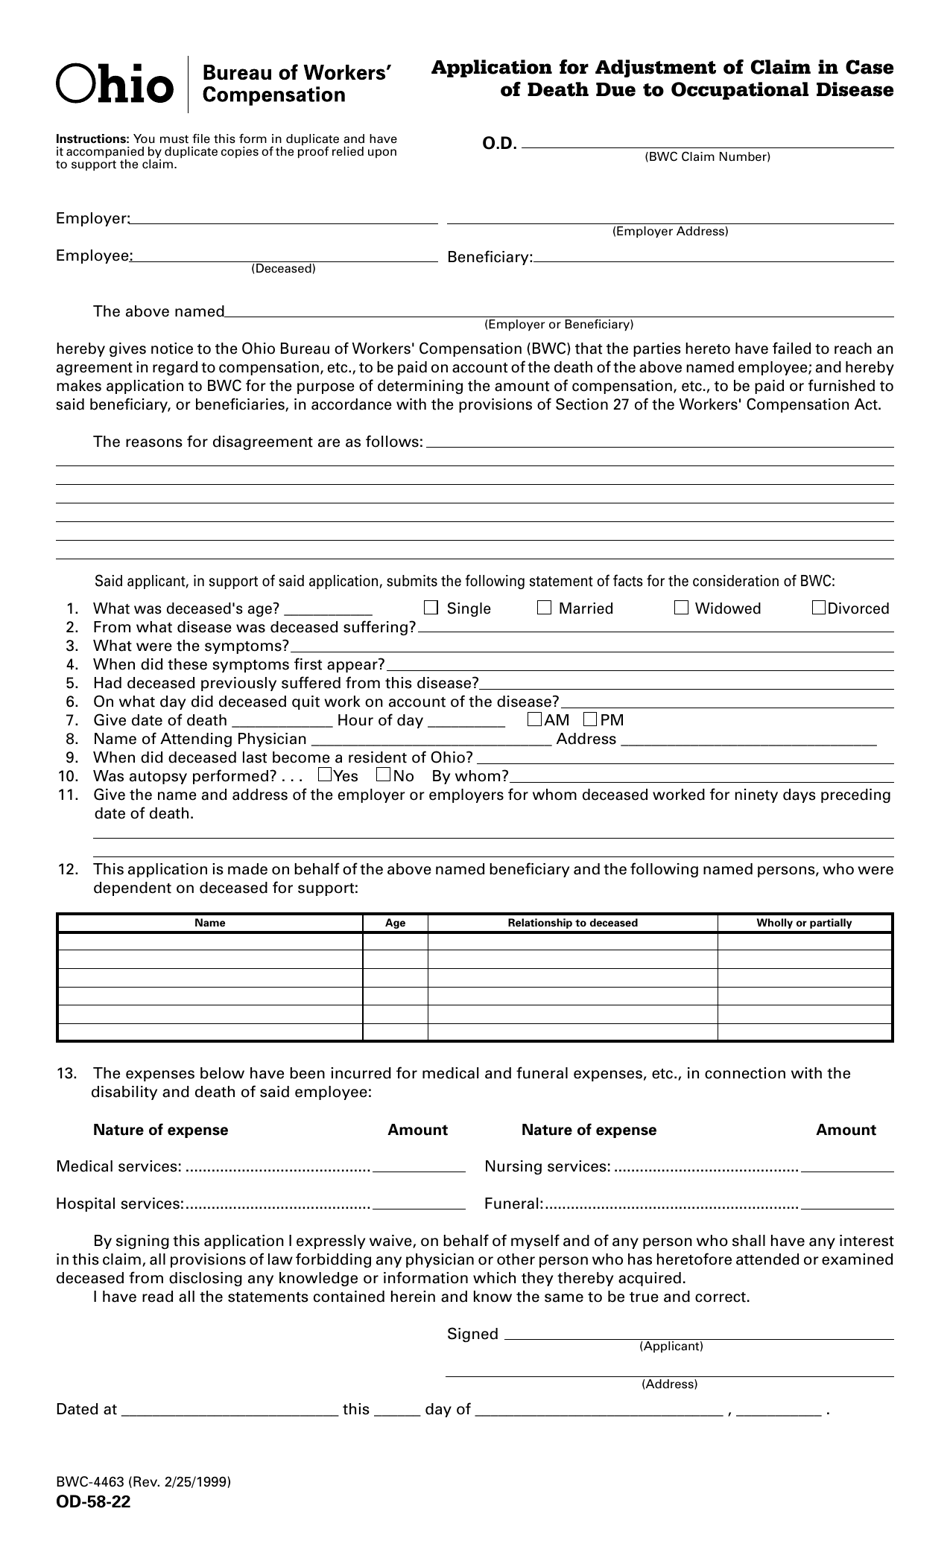 OD- Form 58-22 (BWC-4463) Application for Adjustment of Claim in Case of Death Due to Occupational Disease - Ohio, Page 1